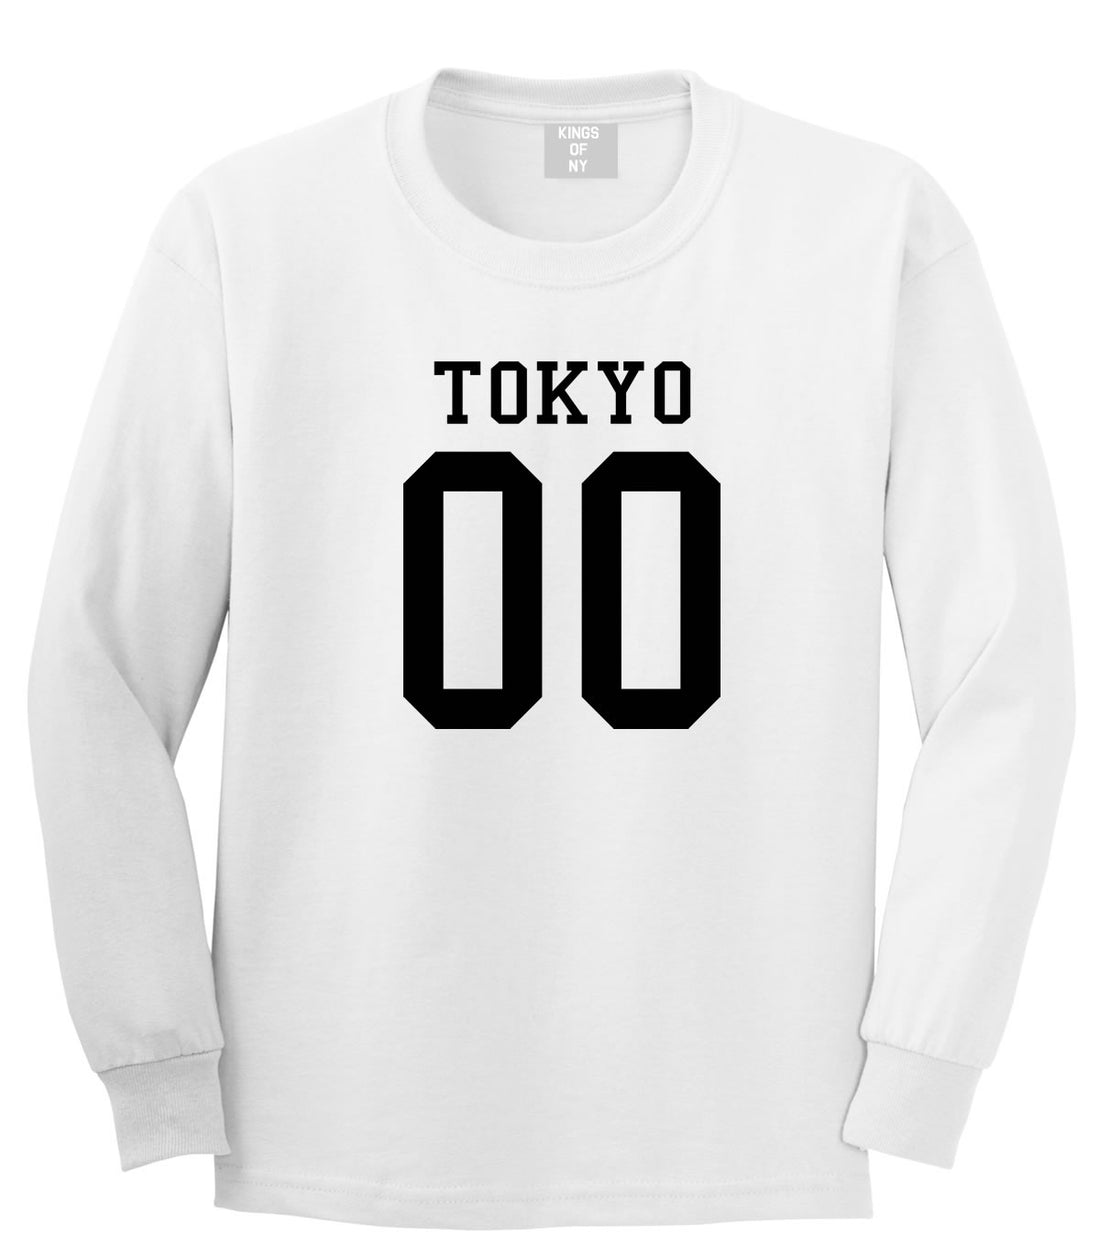 Tokyo Team 00 Jersey Japan Long Sleeve T-Shirt in White By Kings Of NY